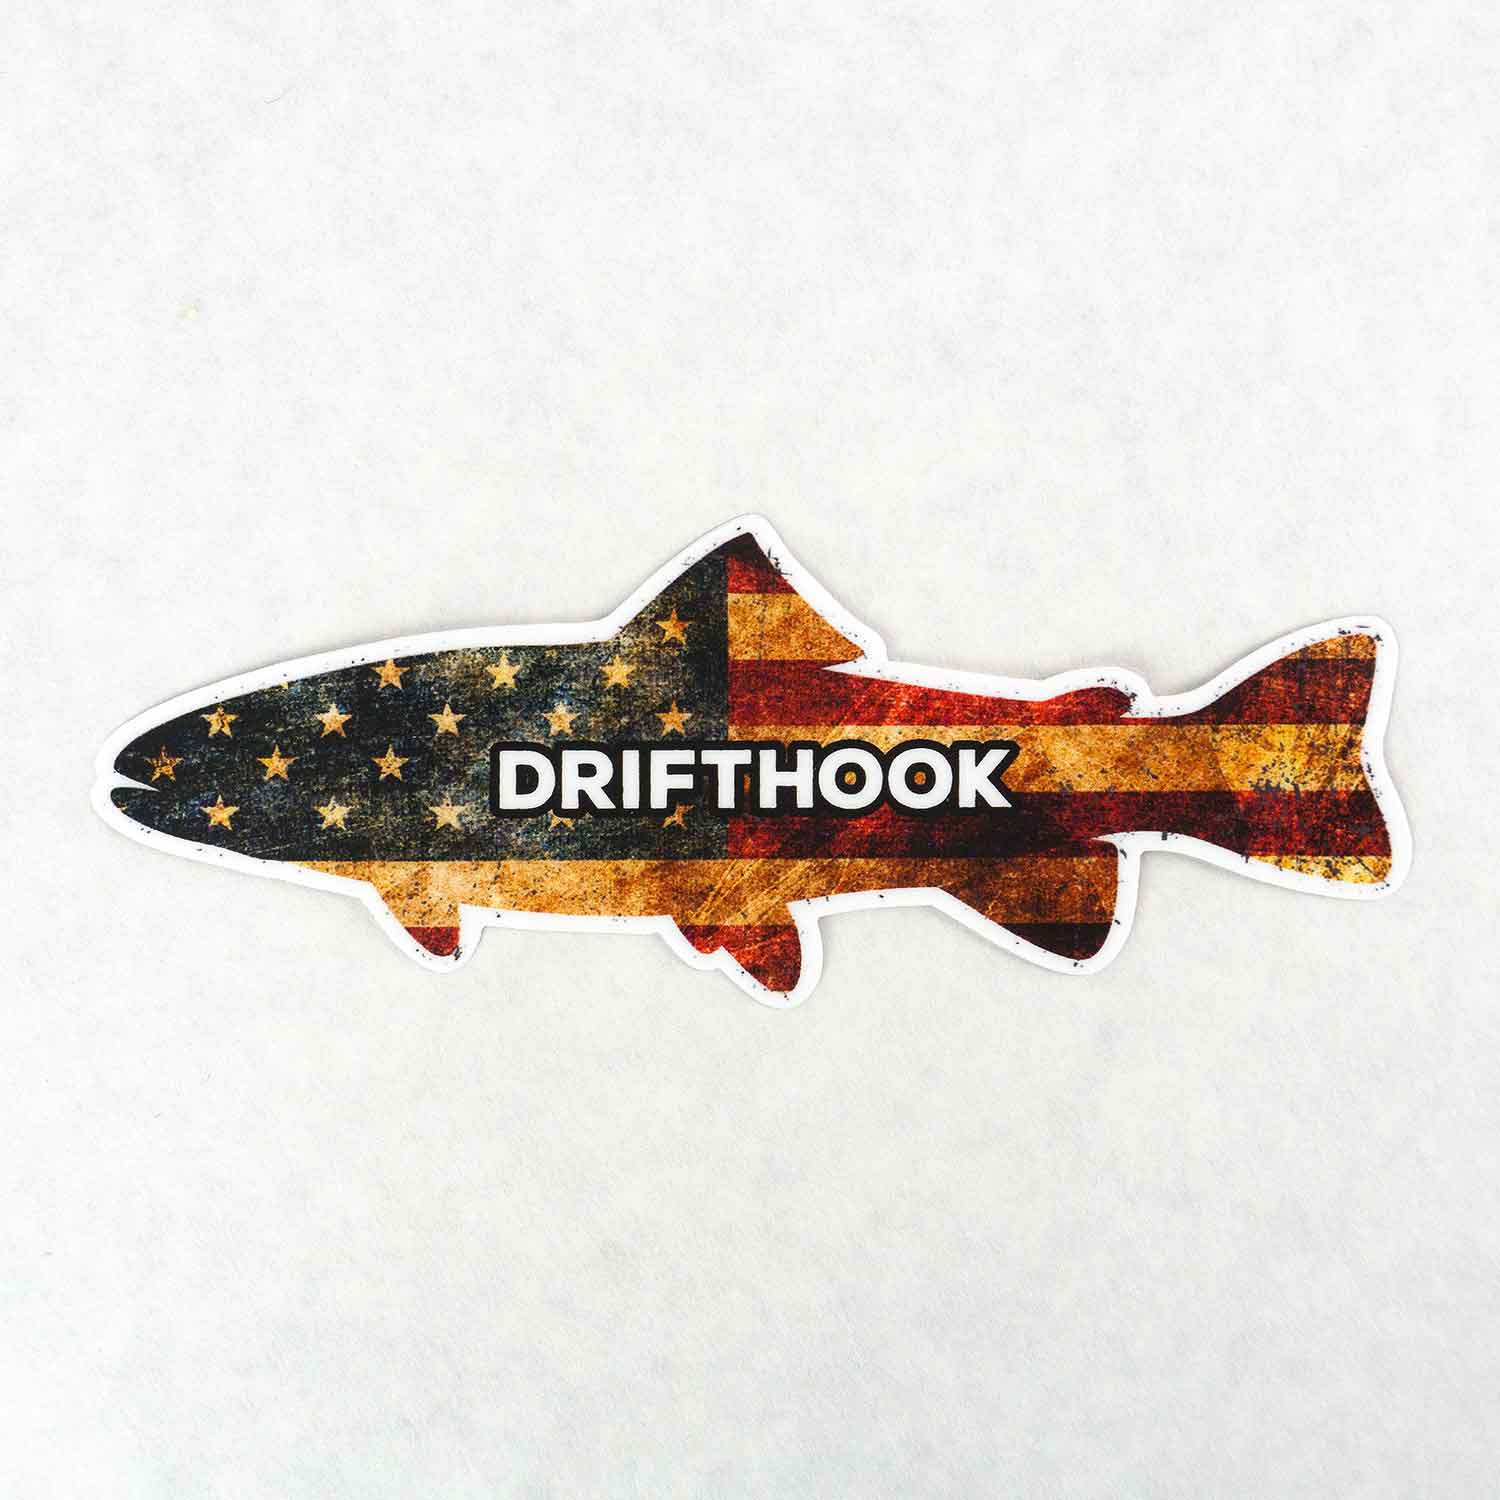 Cory Streett Brown Trout Sticker - Fly Slaps Fly Fishing Stickers